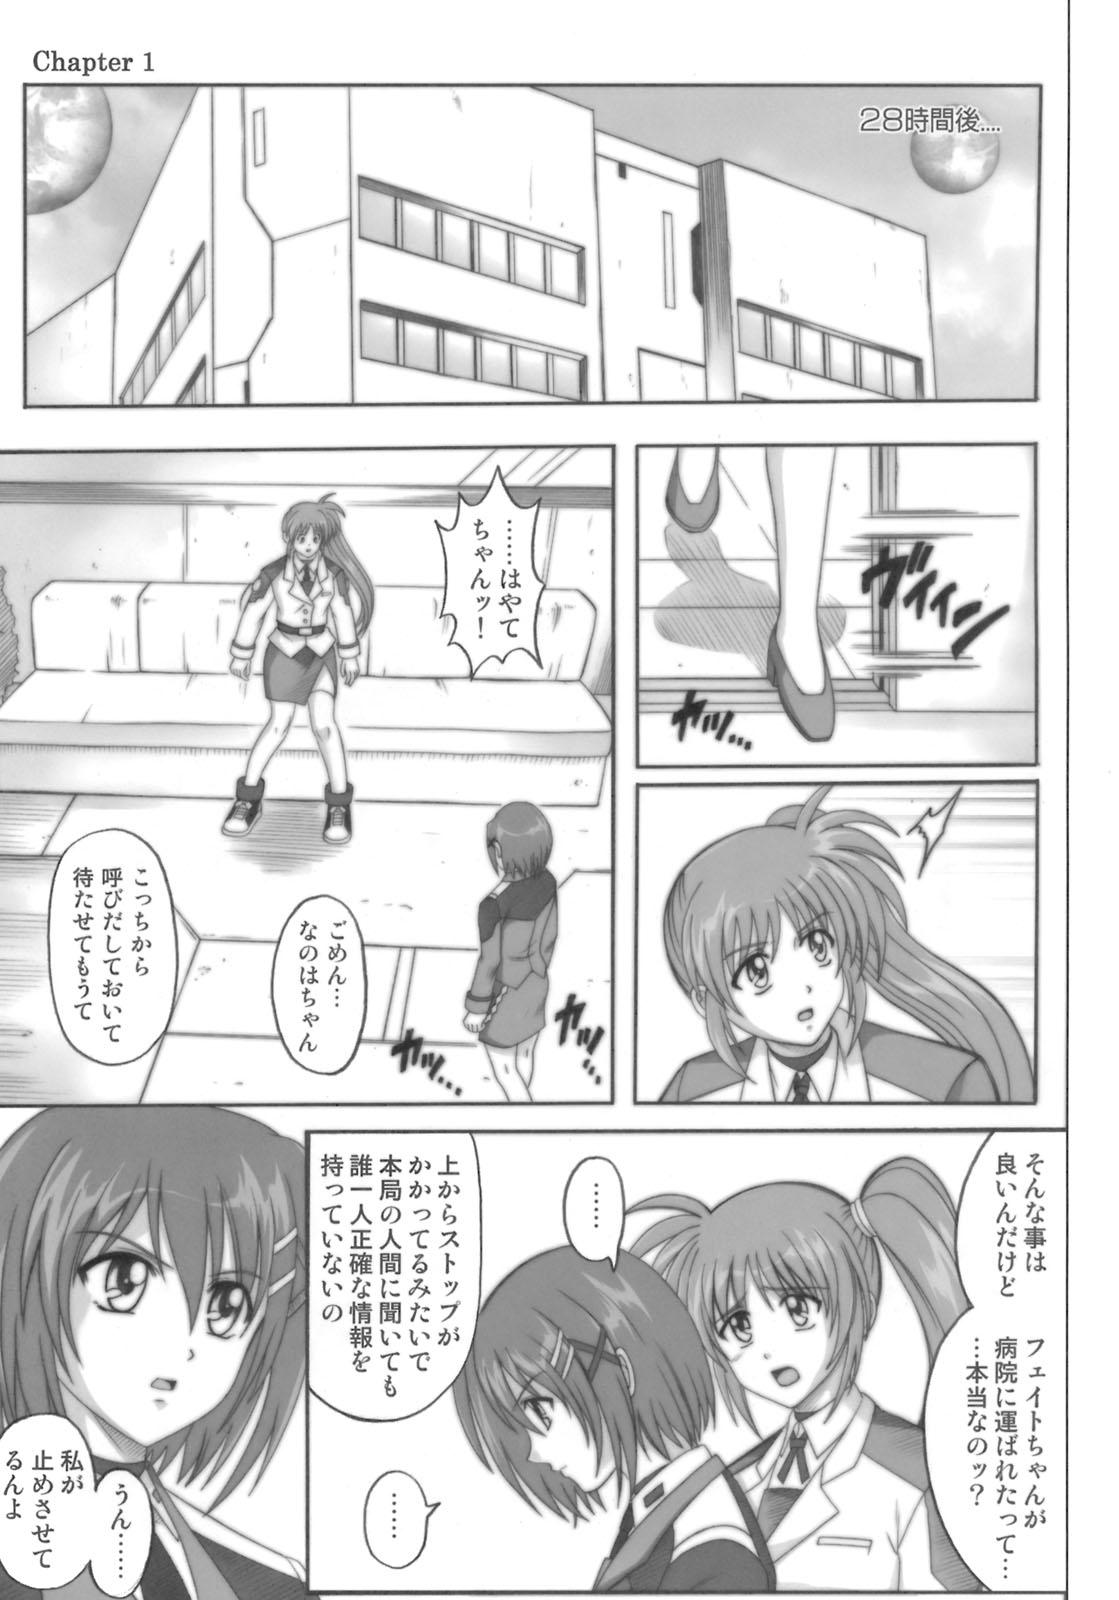 Teen Sex 850 - Color Classic Situation Note Extention - Mahou shoujo lyrical nanoha Amateur Porn Free - Page 4